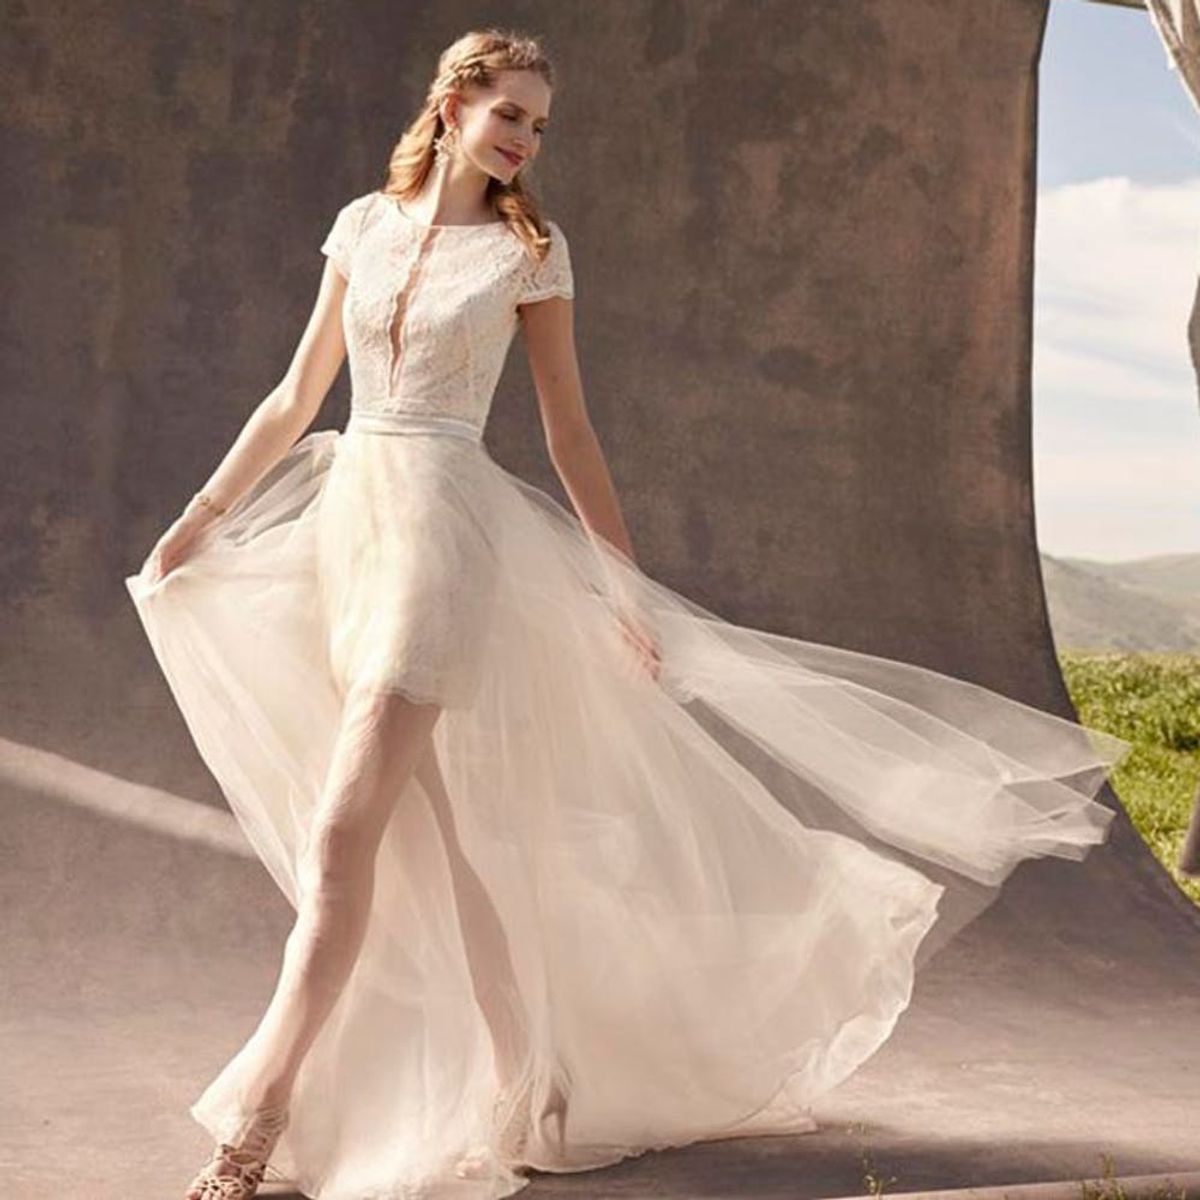 Build Your Own Wedding Dress With BHLDN’s New Bridal Separates Line